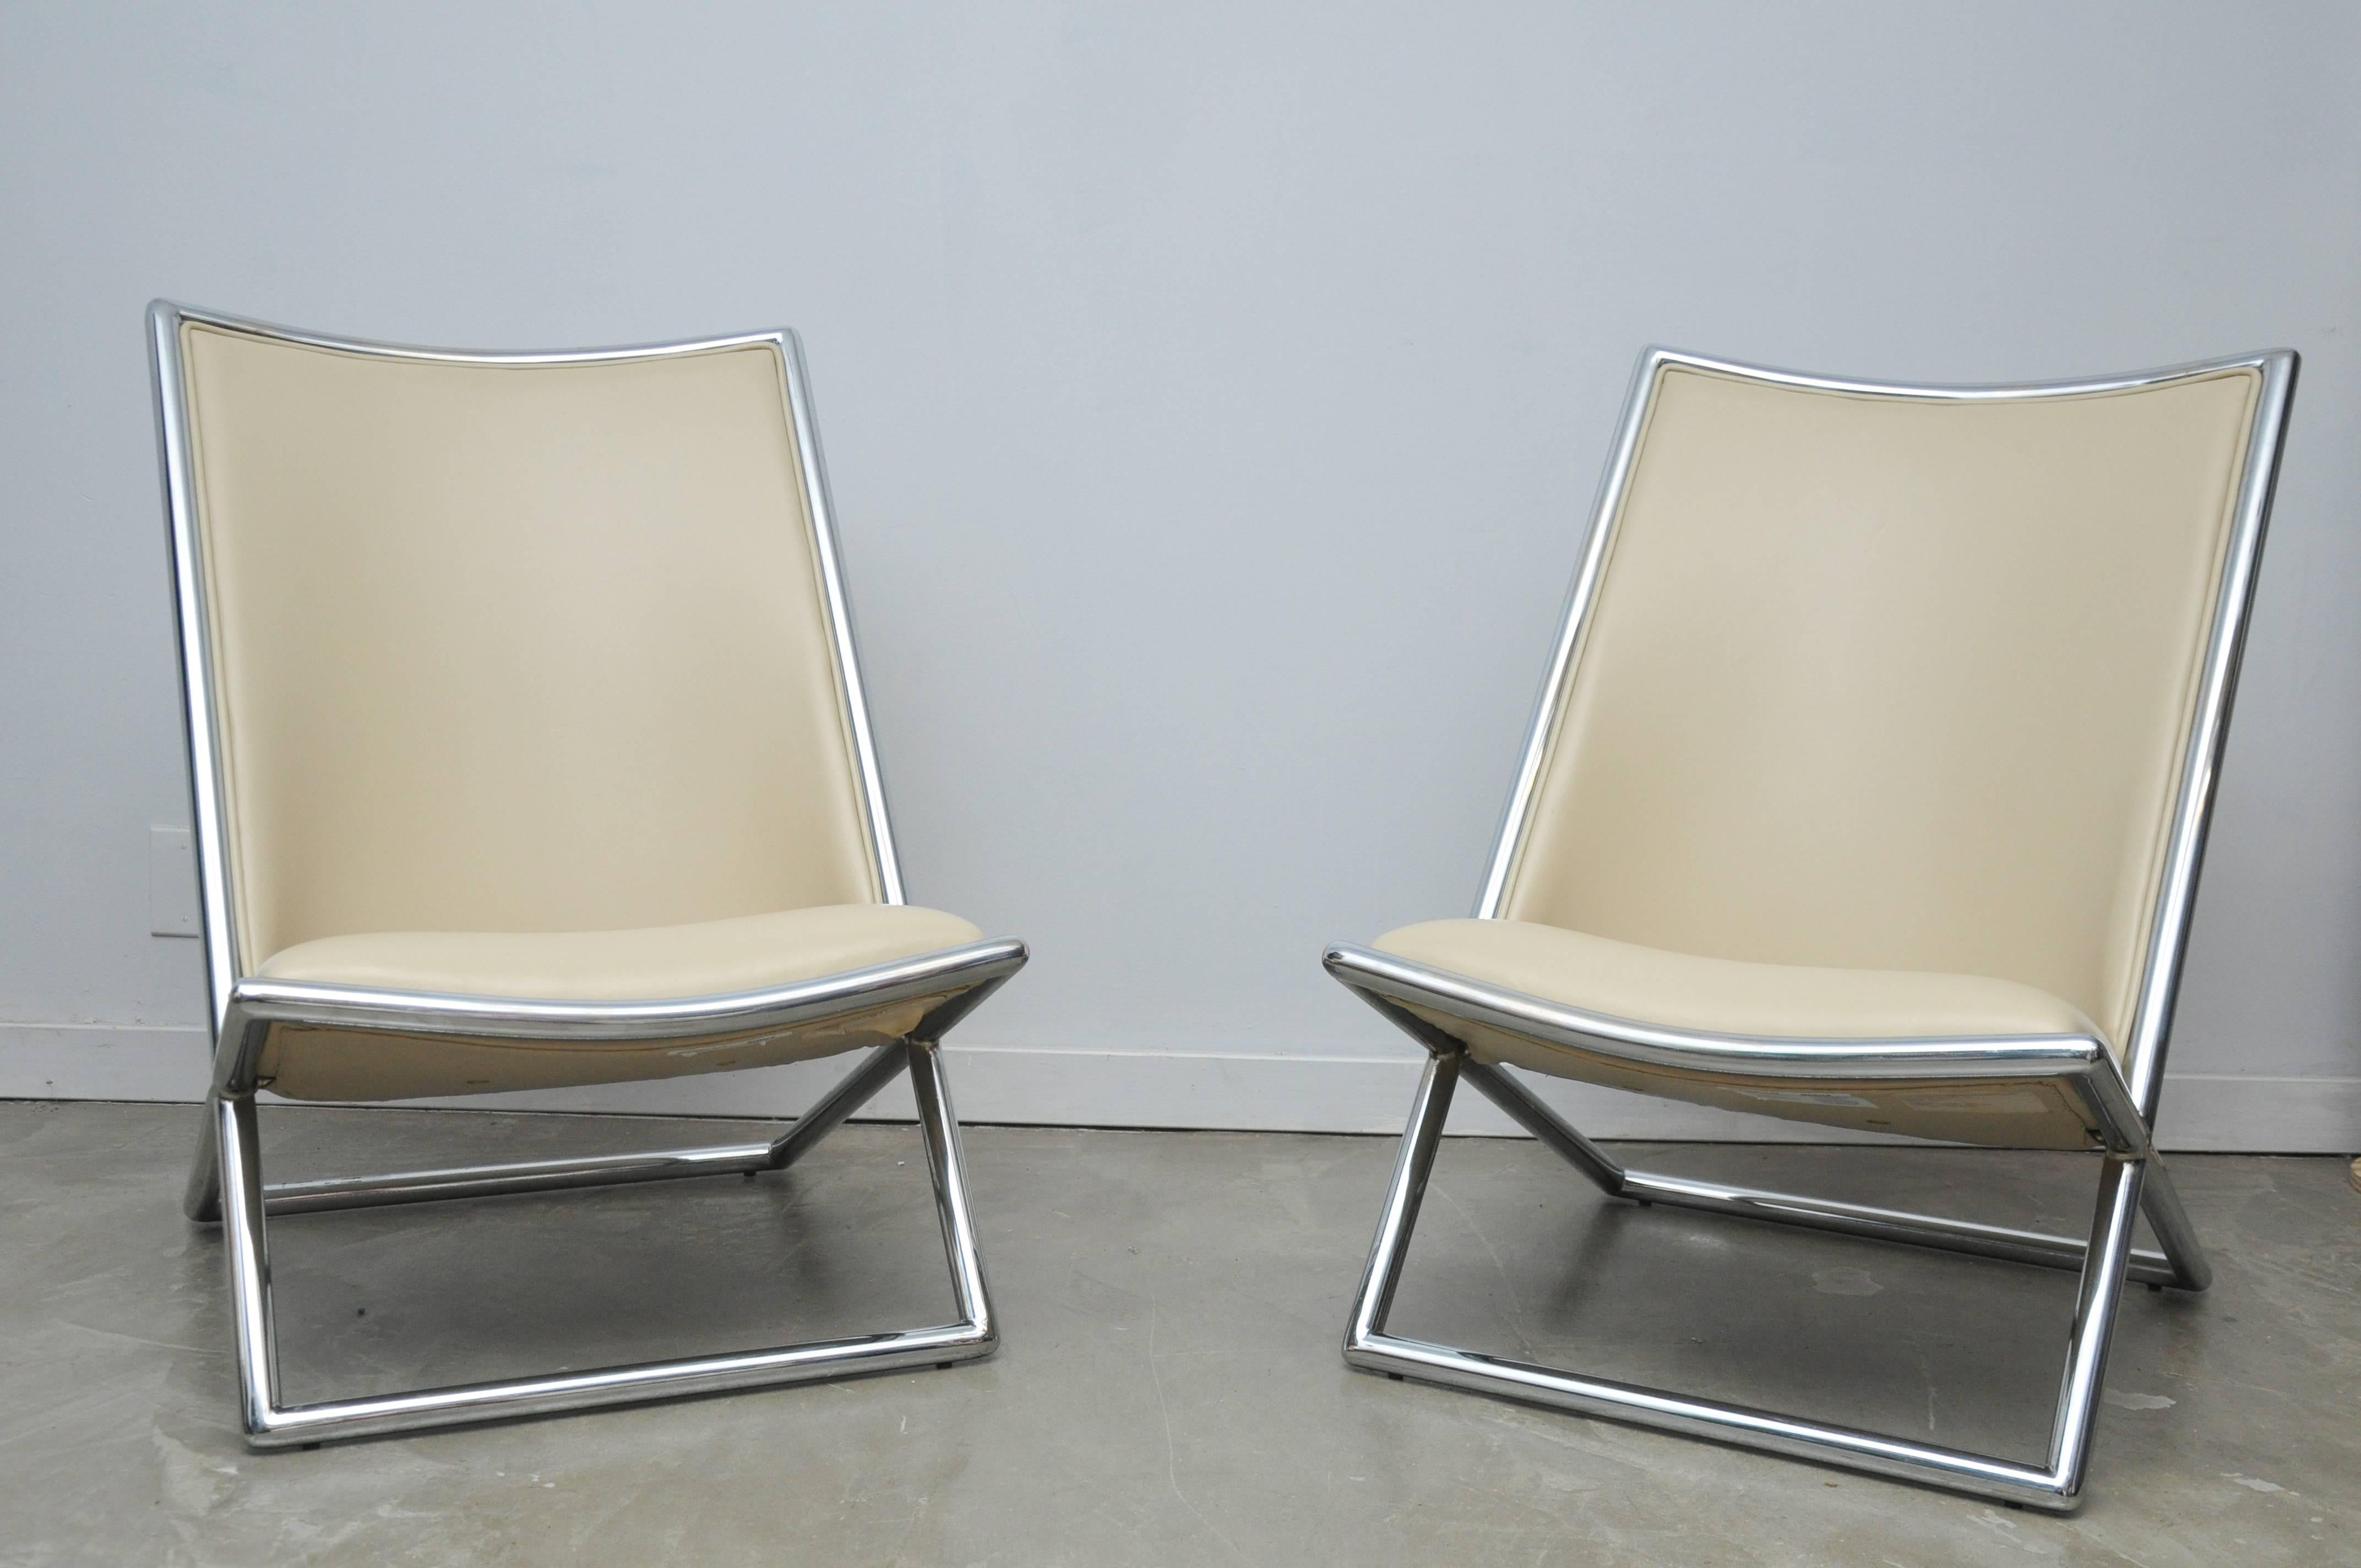 Chrome frame scissor chairs by Ward Bennett with white leather.